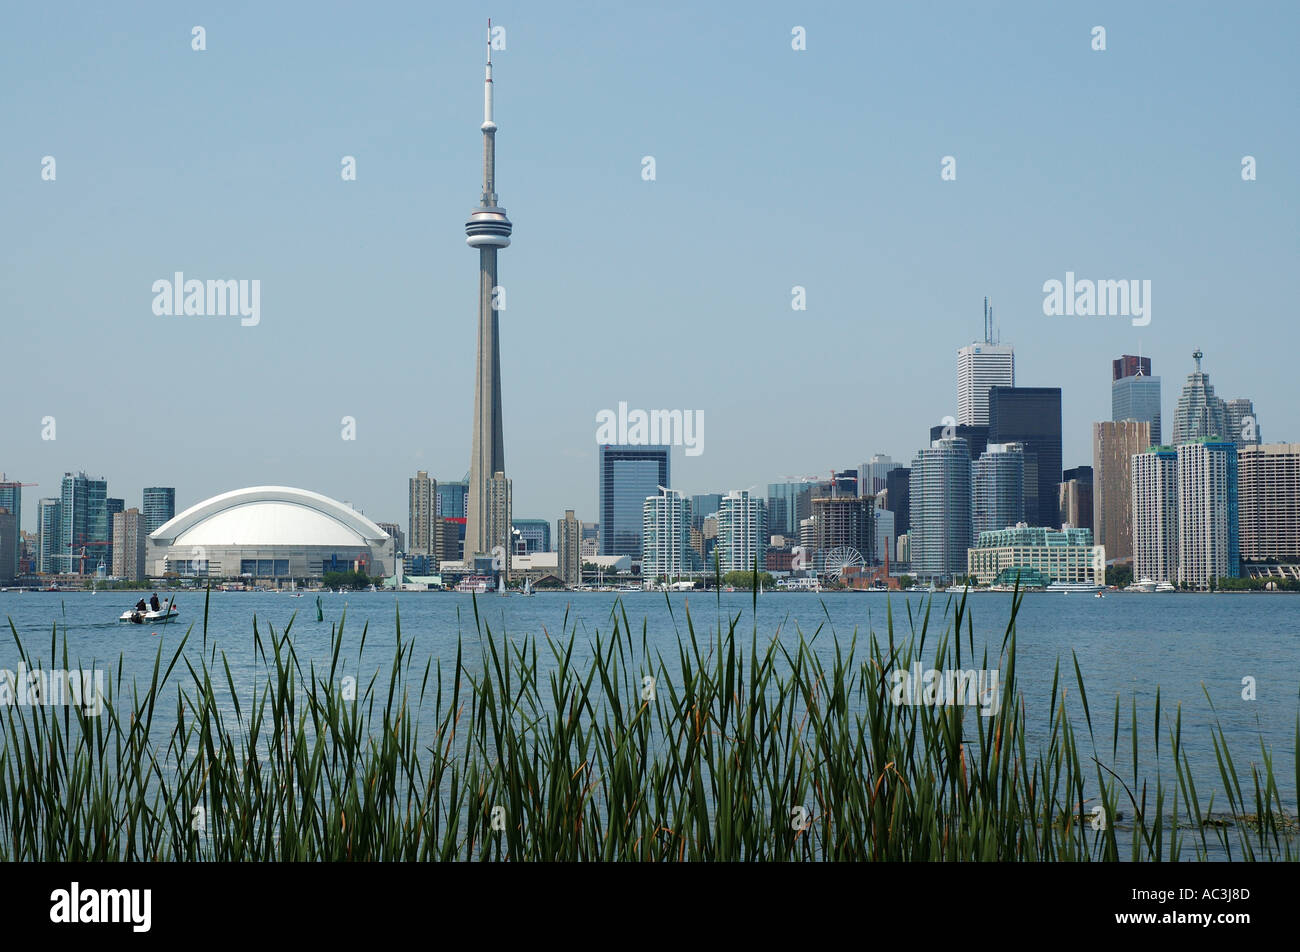 Toronto Skyline with CN Tower and Skydome and Reeds in foreground Stock Photo